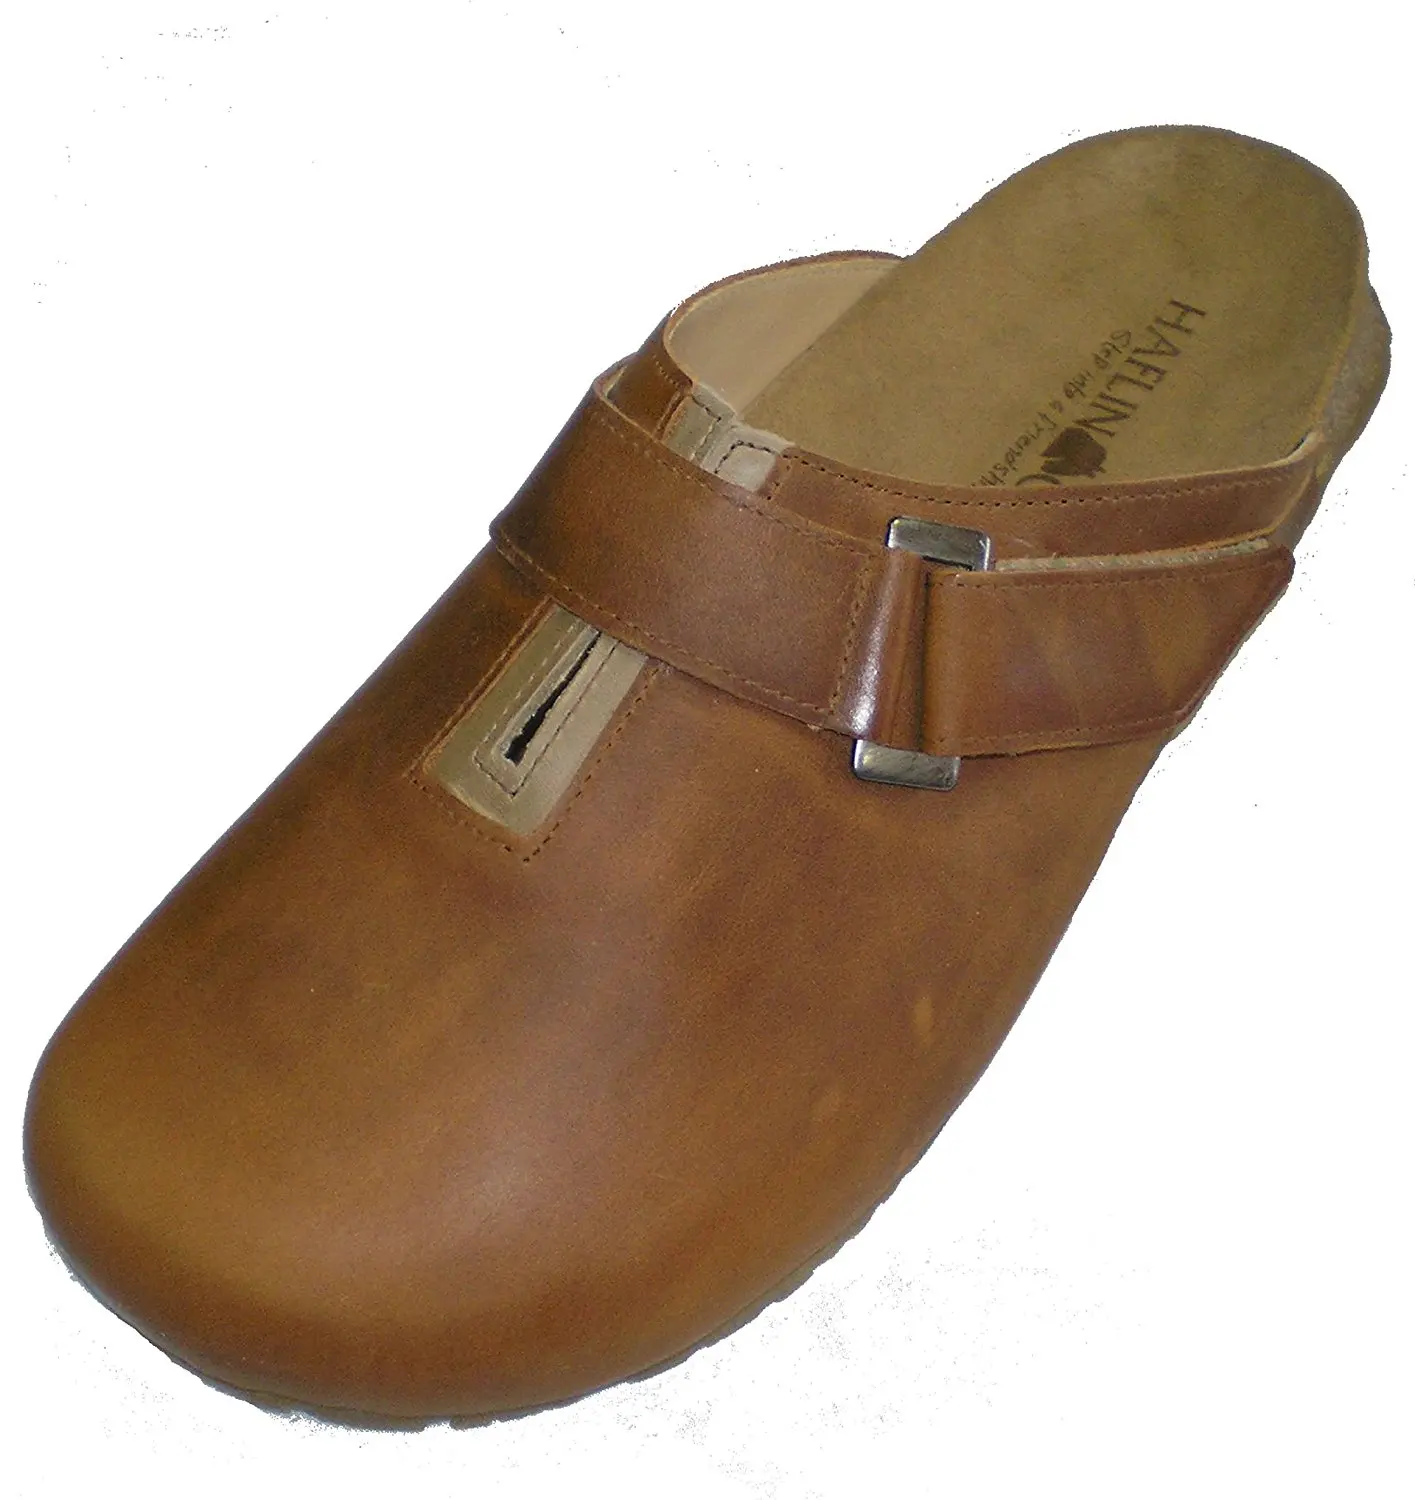 Cheap Haflinger Clogs Clearance, find 